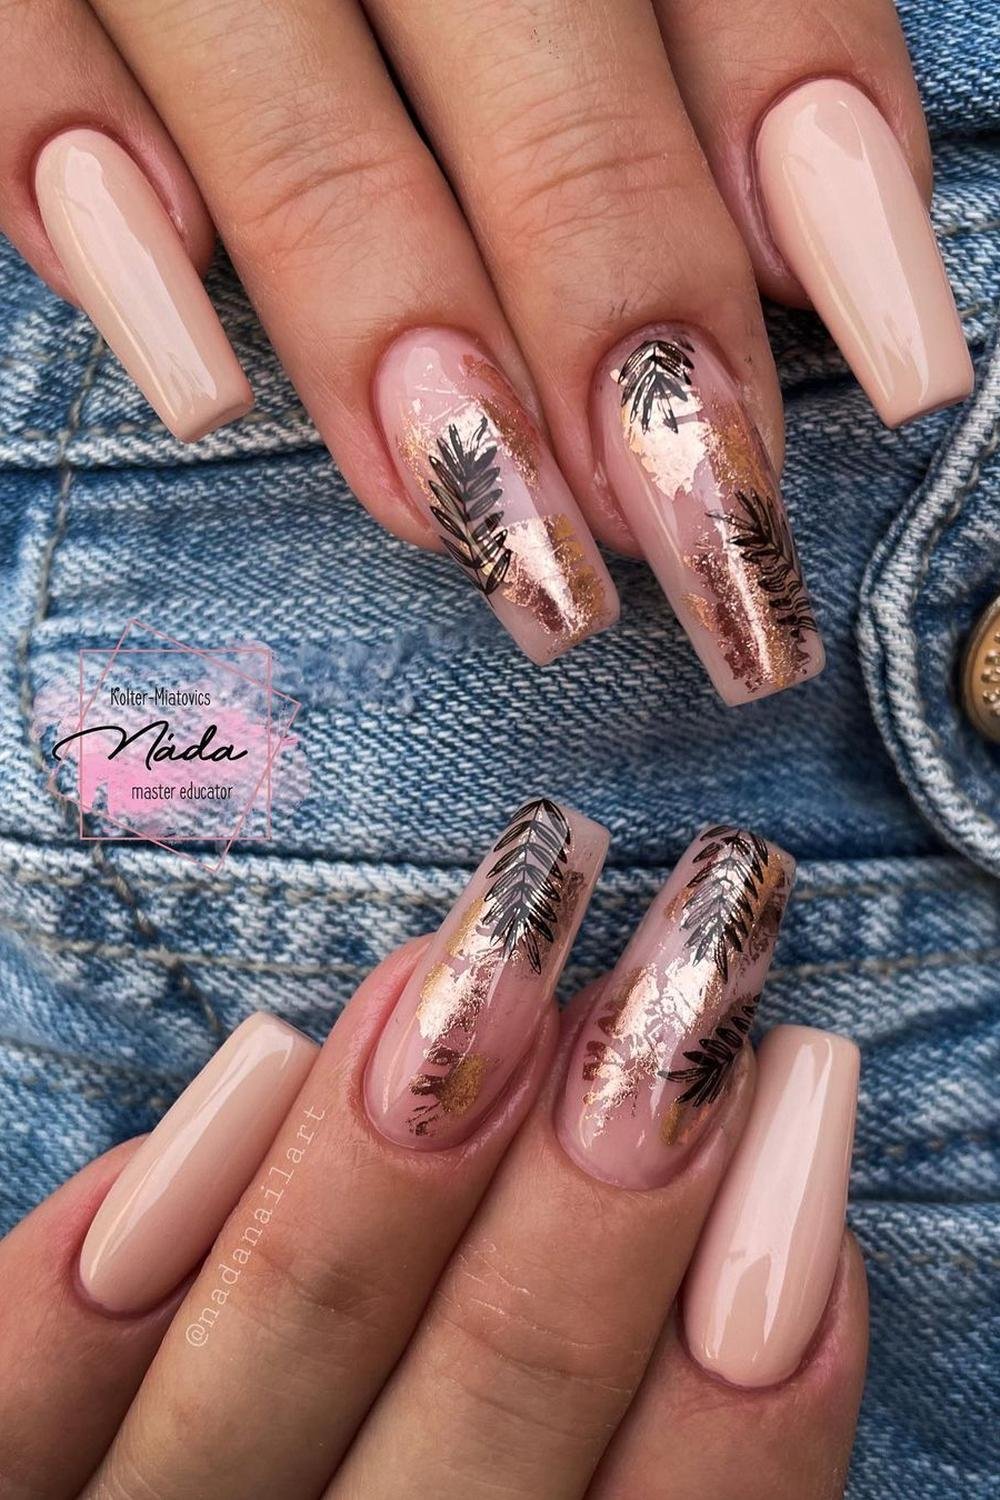 32 - Picture of Nude Nails